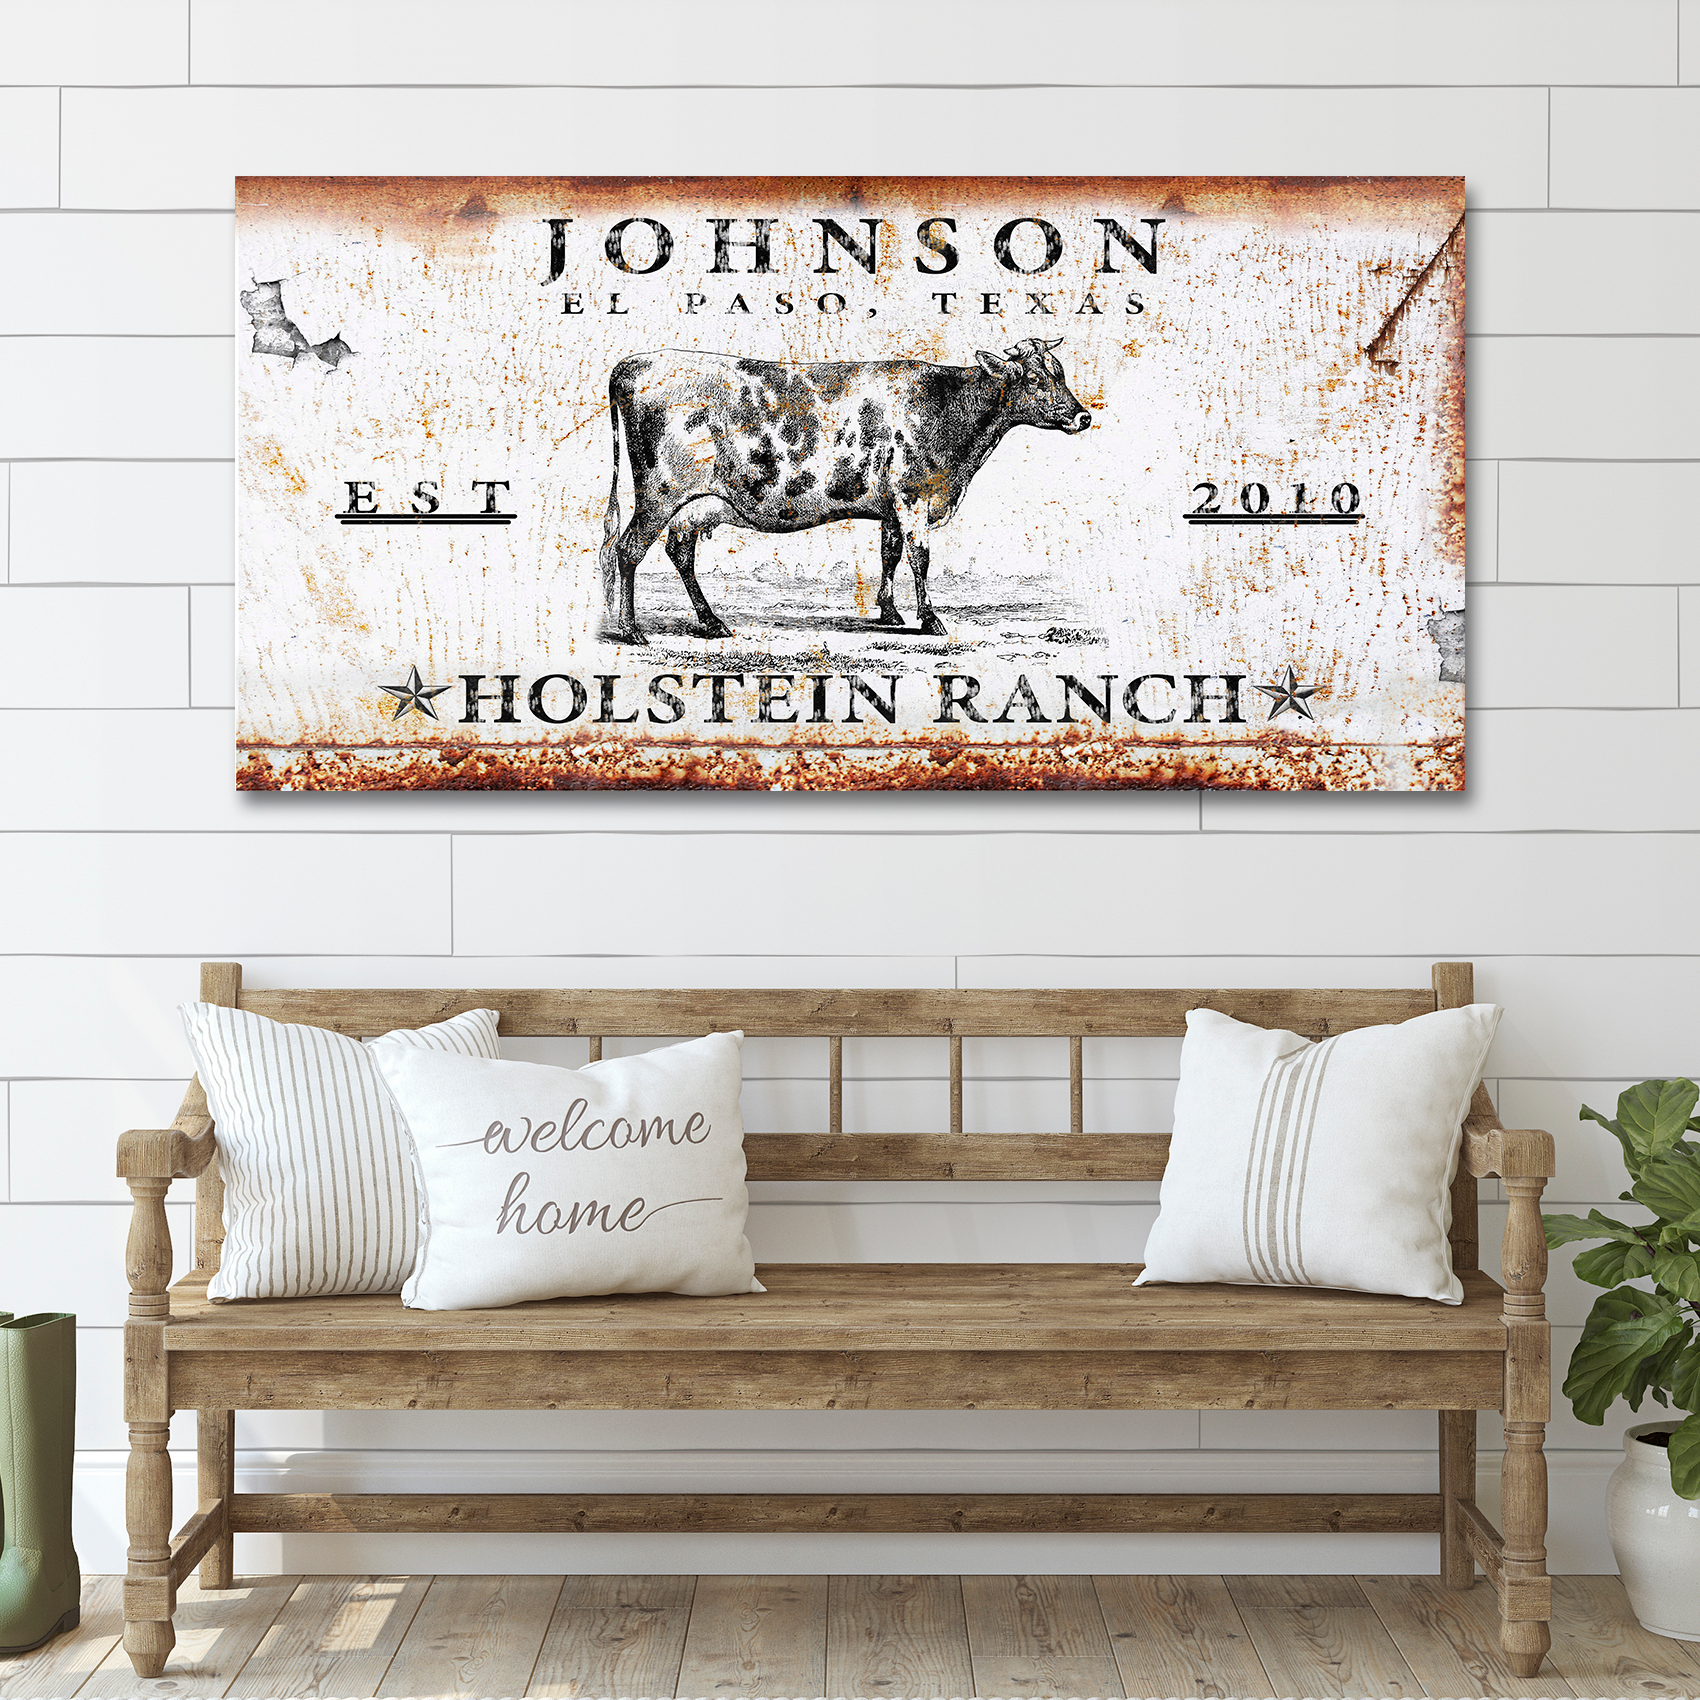 Holstein Ranch Sign - Image by Tailored Canvases